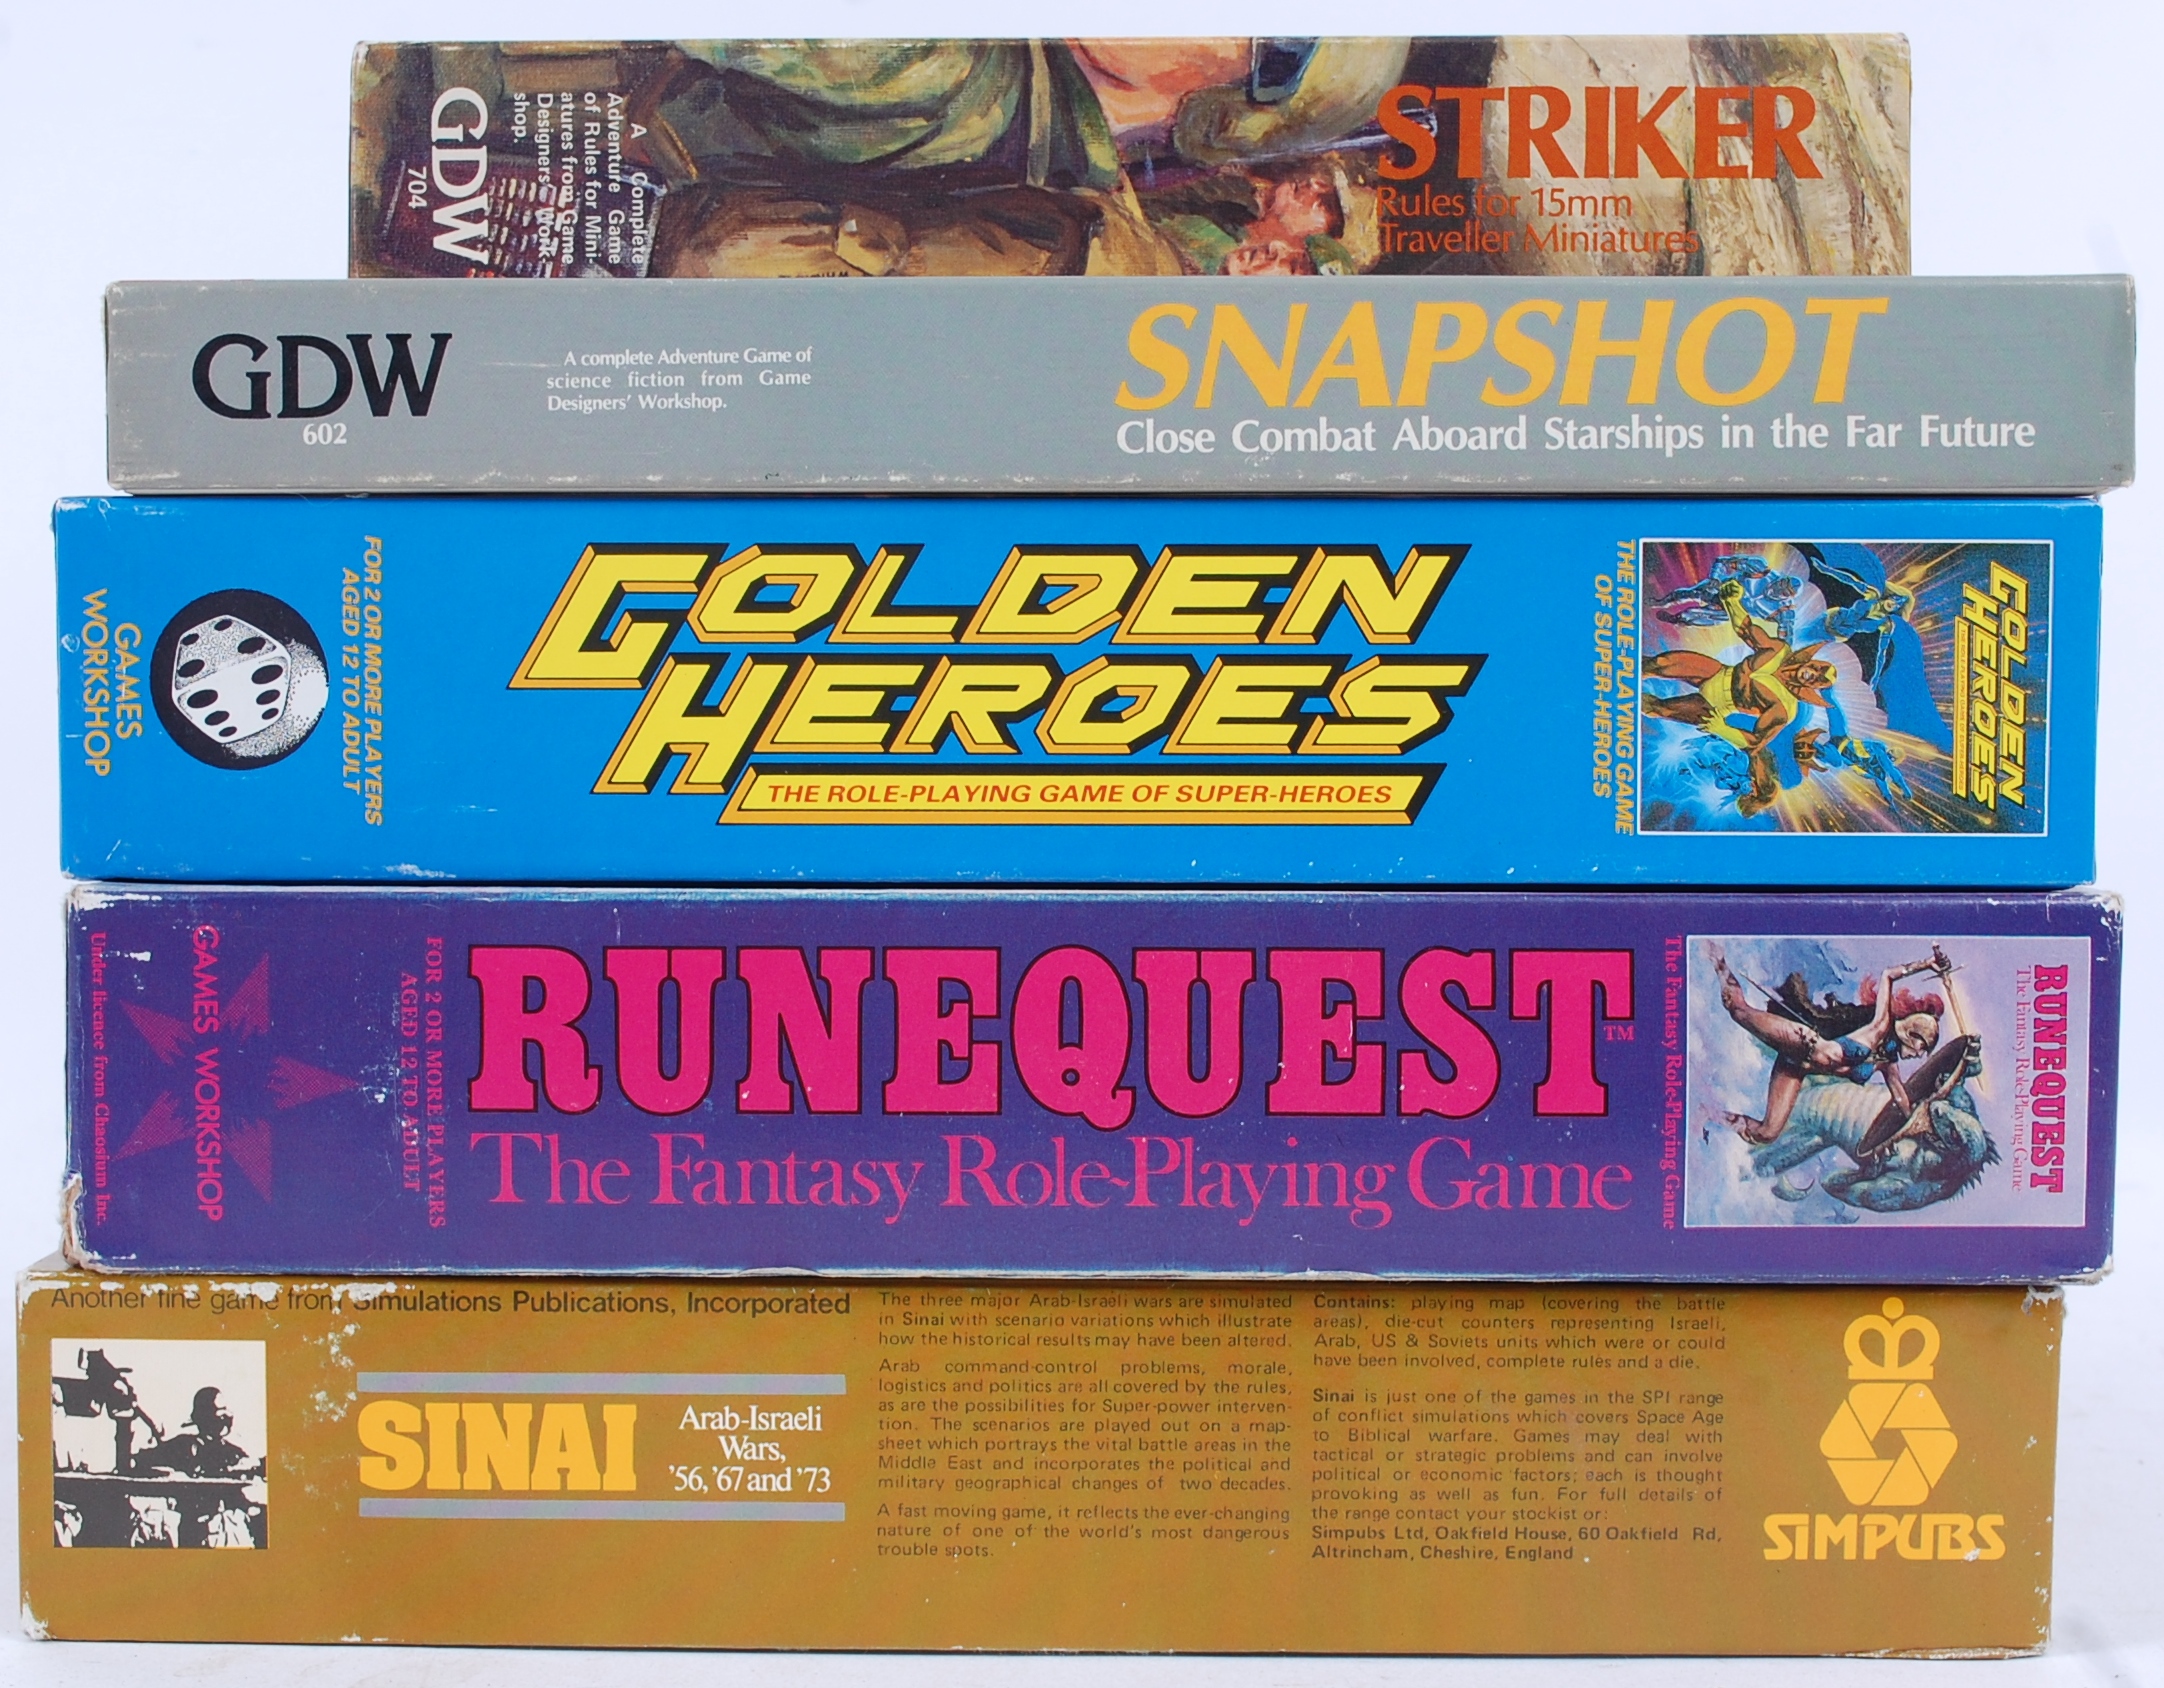 ROLE PLAYING GAMES; A collection of 5x vintage boxed role playing games - Sinai, Runequest,